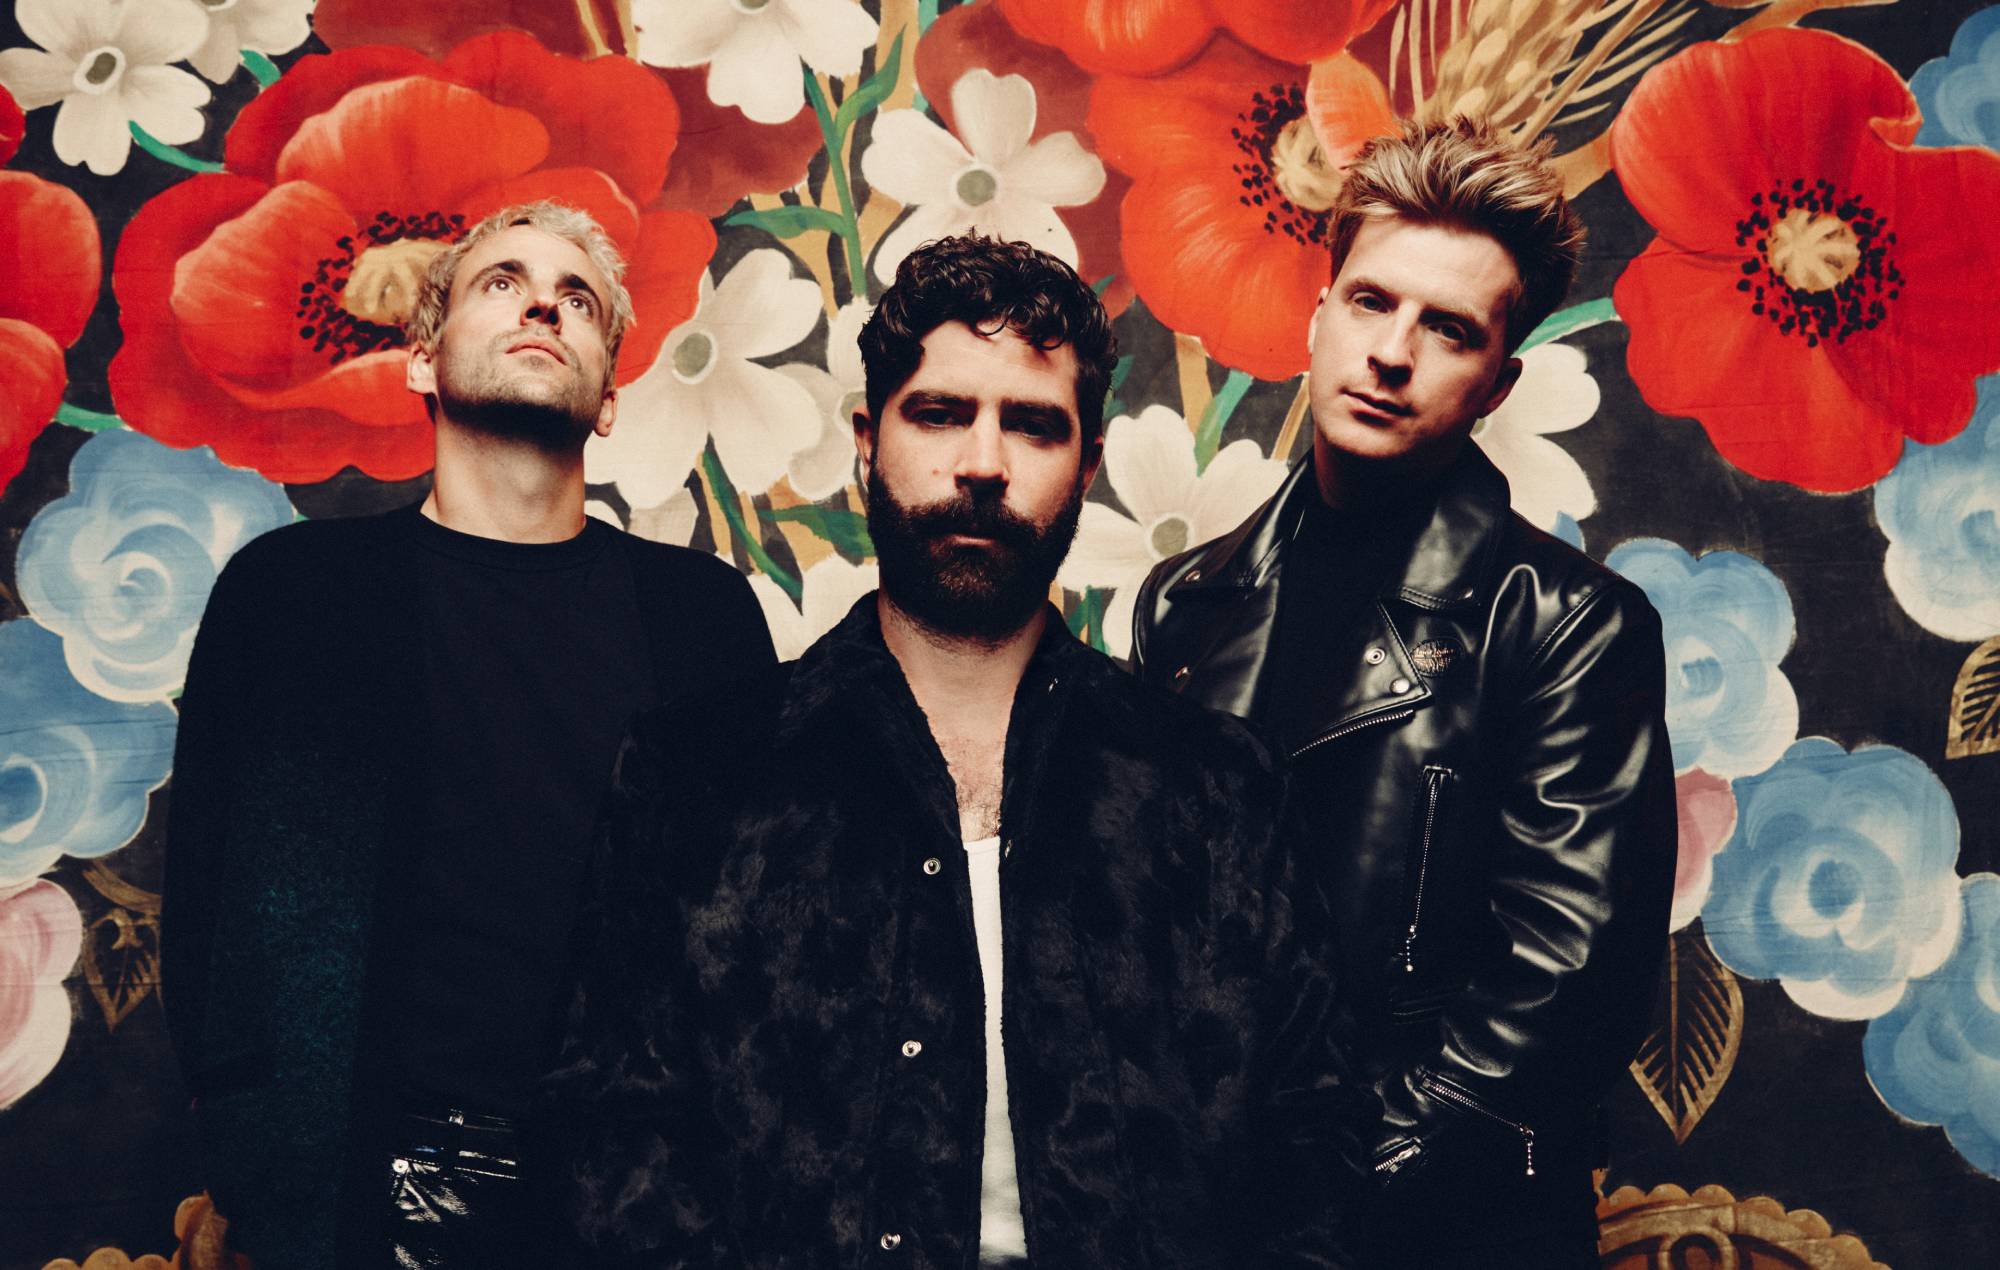 Check out Foals’ ravey new single ‘Wake Me Up’ as they tell us about their party-ready new album